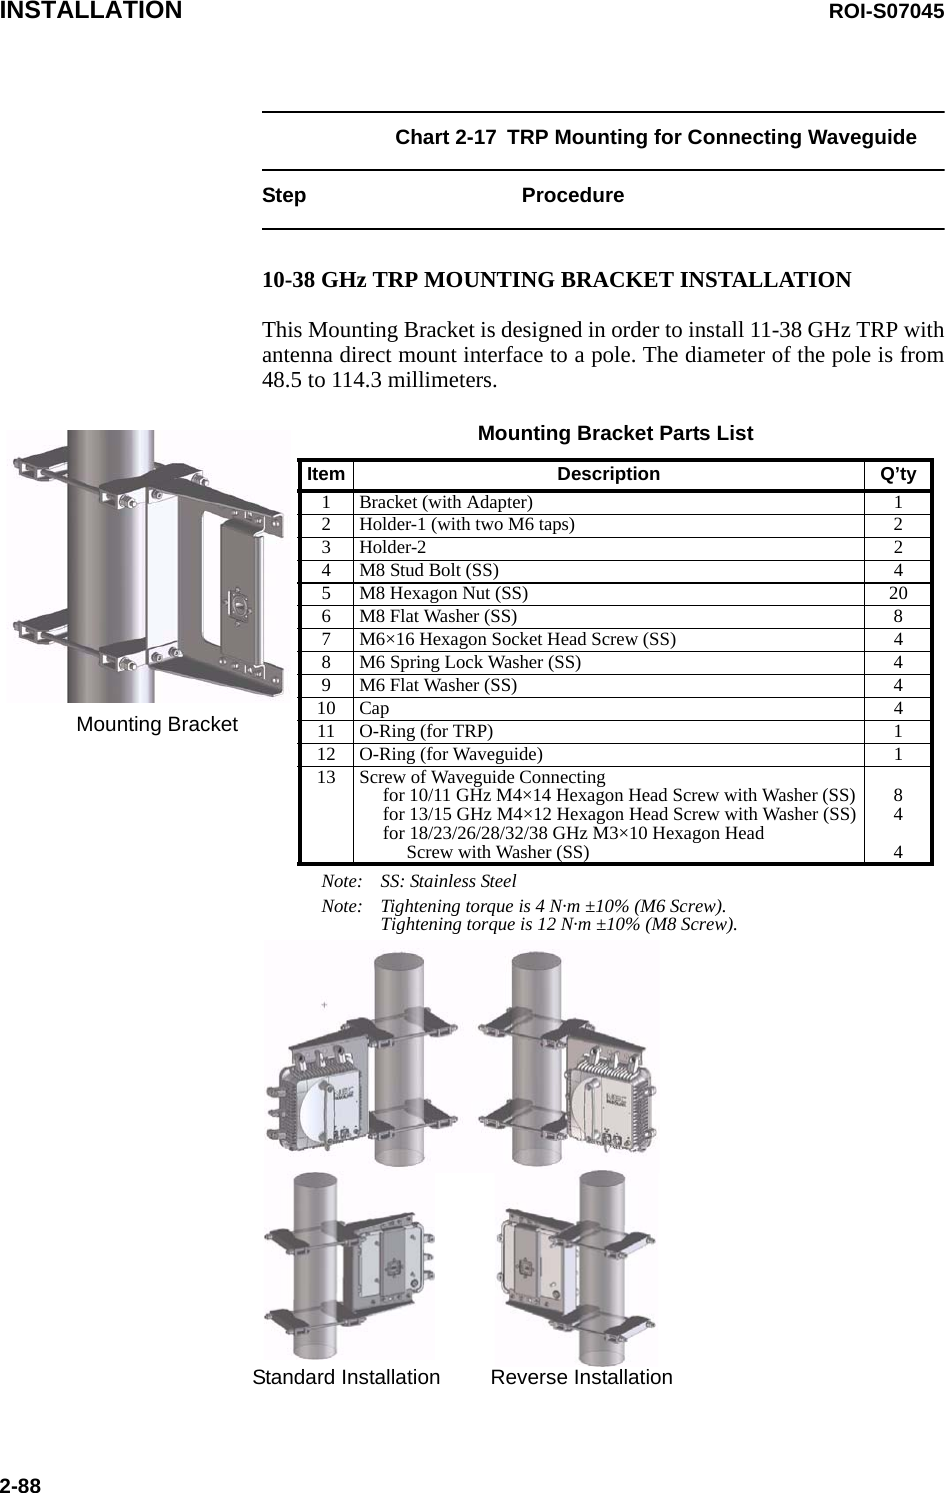 INSTALLATION ROI-S070452-88Chart 2-17  TRP Mounting for Connecting WaveguideStep Procedure10-38 GHz TRP MOUNTING BRACKET INSTALLATIONThis Mounting Bracket is designed in order to install 11-38 GHz TRP withantenna direct mount interface to a pole. The diameter of the pole is from48.5 to 114.3 millimeters.Note: SS: Stainless SteelNote: Tightening torque is 4 N·m ±10% (M6 Screw).Tightening torque is 12 N·m ±10% (M8 Screw).Mounting Bracket Parts ListItem Description Q’ty1 Bracket (with Adapter) 12 Holder-1 (with two M6 taps) 23 Holder-2 24 M8 Stud Bolt (SS) 45 M8 Hexagon Nut (SS) 206 M8 Flat Washer (SS) 87 M6×16 Hexagon Socket Head Screw (SS) 48 M6 Spring Lock Washer (SS) 49 M6 Flat Washer (SS) 410 Cap 411 O-Ring (for TRP) 112 O-Ring (for Waveguide) 113 Screw of Waveguide Connectingfor 10/11 GHz M4×14 Hexagon Head Screw with Washer (SS)for 13/15 GHz M4×12 Hexagon Head Screw with Washer (SS)for 18/23/26/28/32/38 GHz M3×10 Hexagon HeadScrew with Washer (SS)844Mounting BracketStandard Installation Reverse Installation